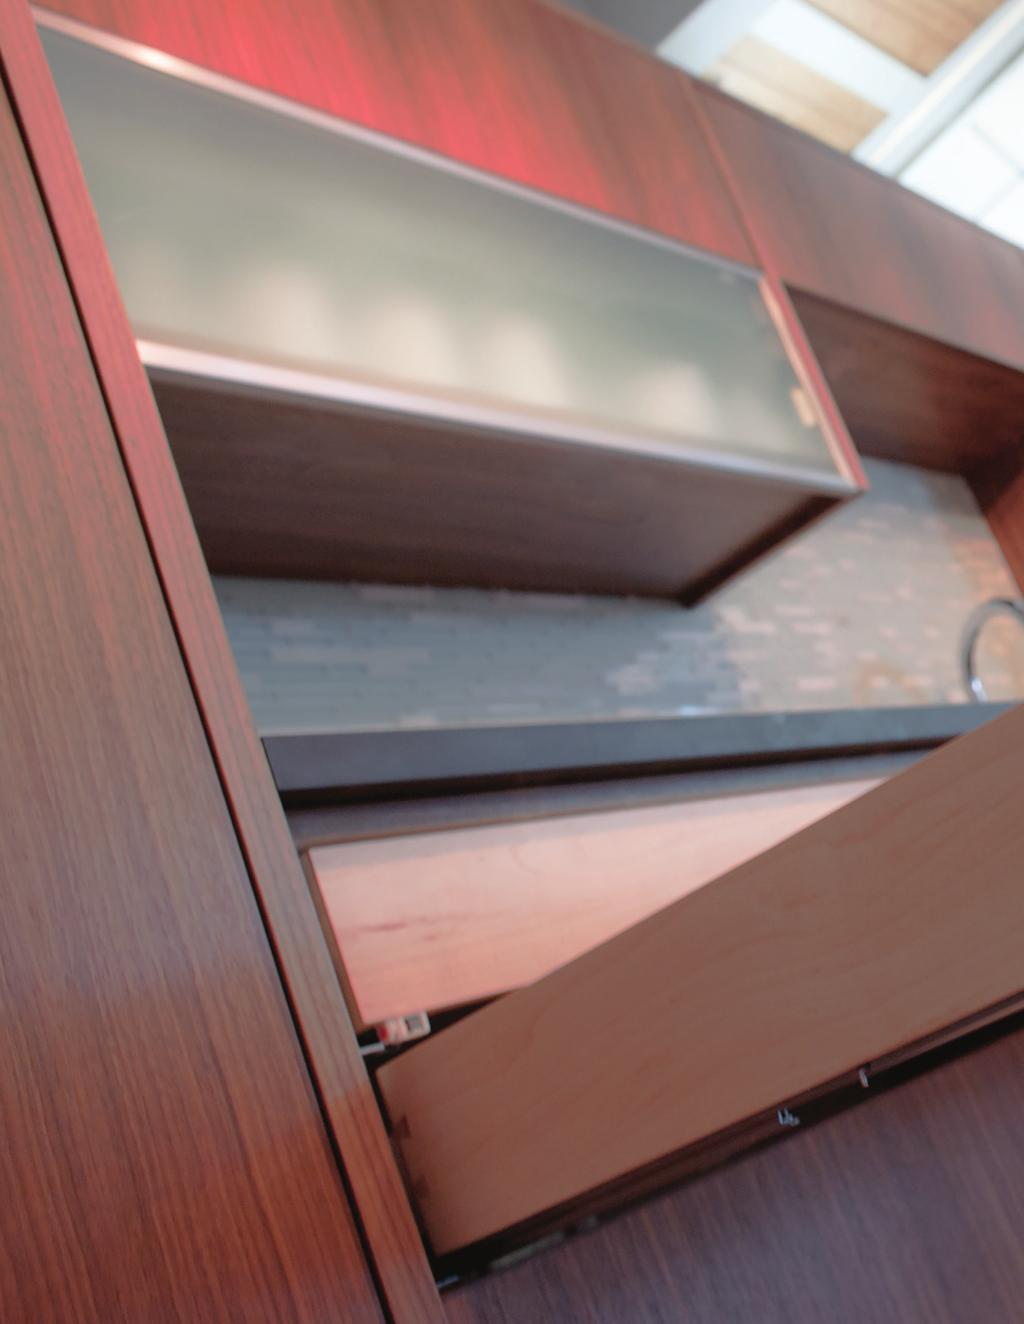 TANDEM plus BLUMOTION TANDEM plus BLUMOTION brings together all of the features, innovations and benefits that Blum has developed since first manufacturing drawer runners in the early